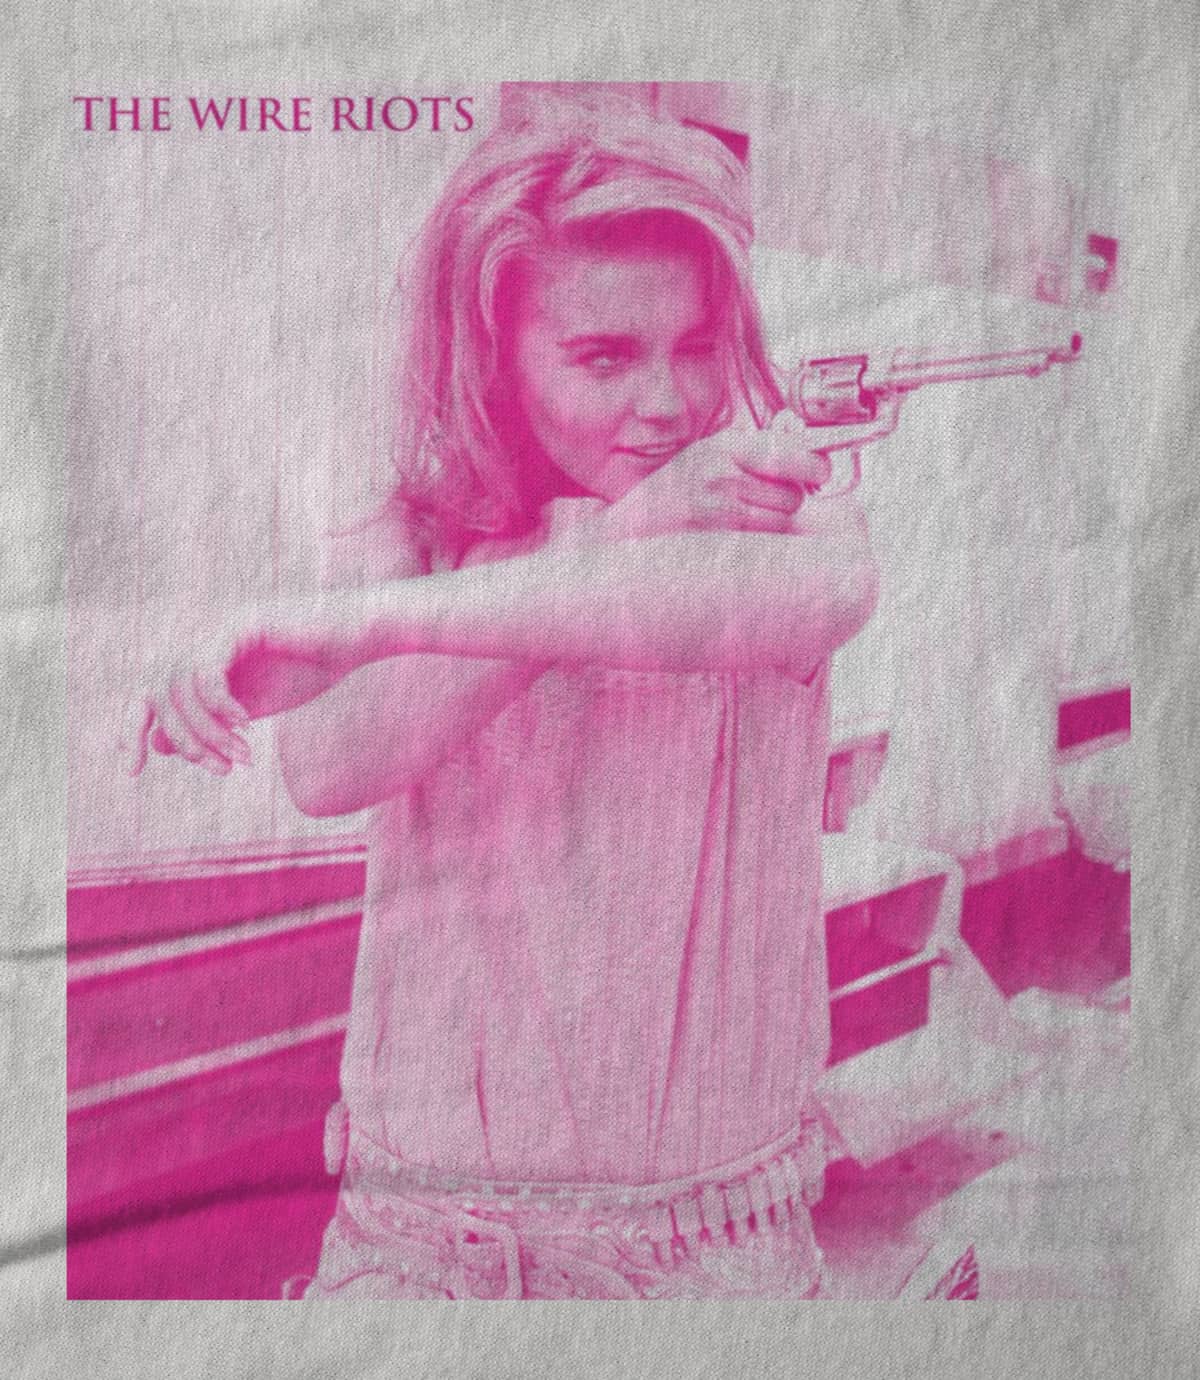 The Wire Riots